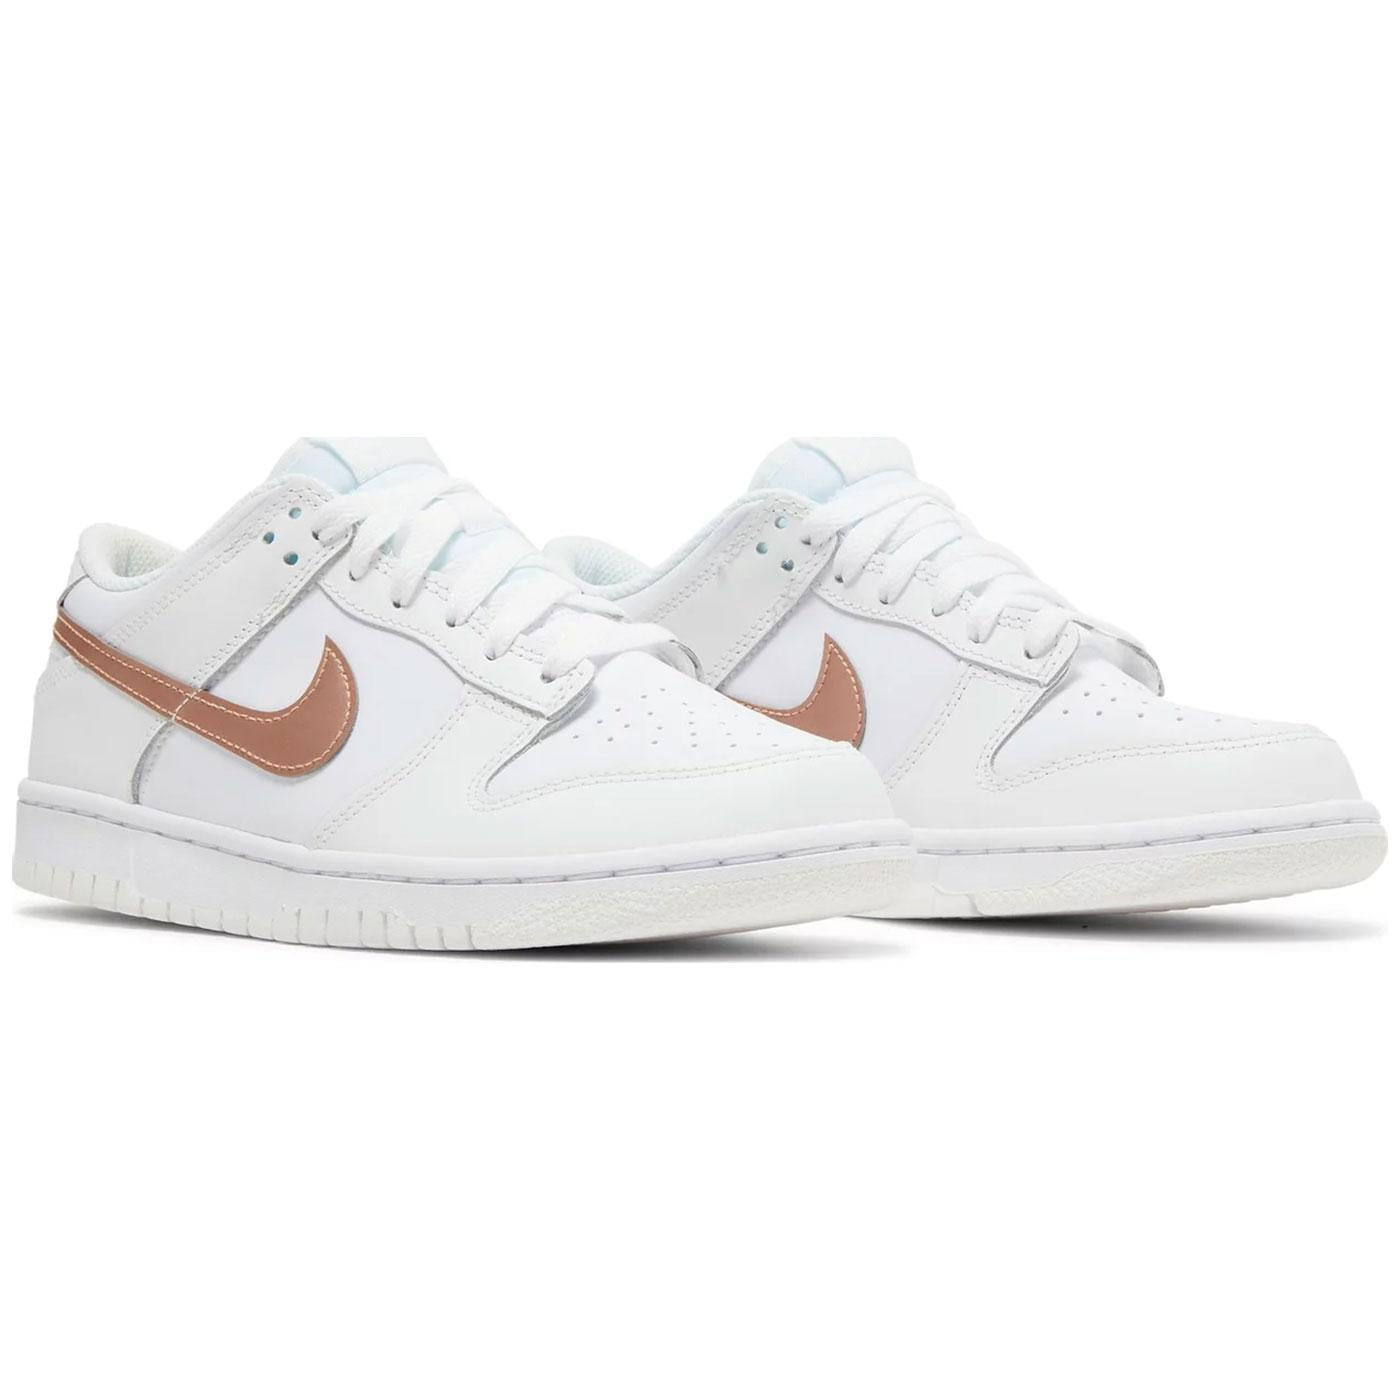 Dunk Low GS 'White Metallic Red Bronze' DH9765 100 New | Nike